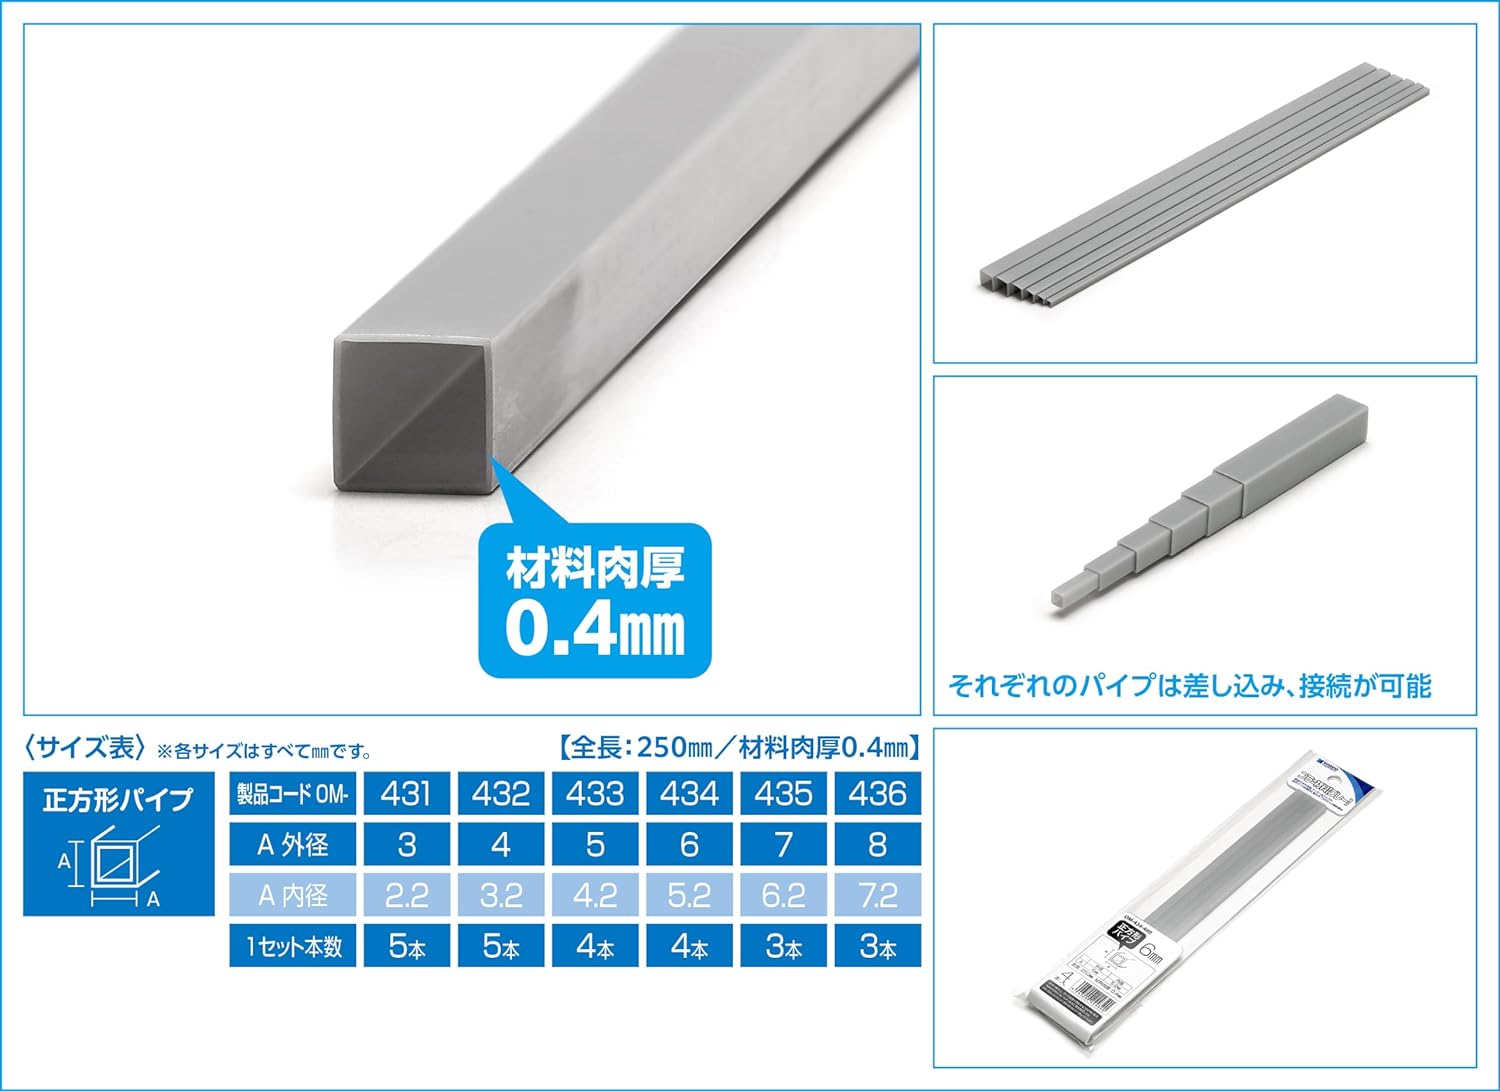 Wave OM-434 Plastic Material Gray Square Pipe 0.2 inch (6 mm), 4 Pieces, Material Series - BanzaiHobby